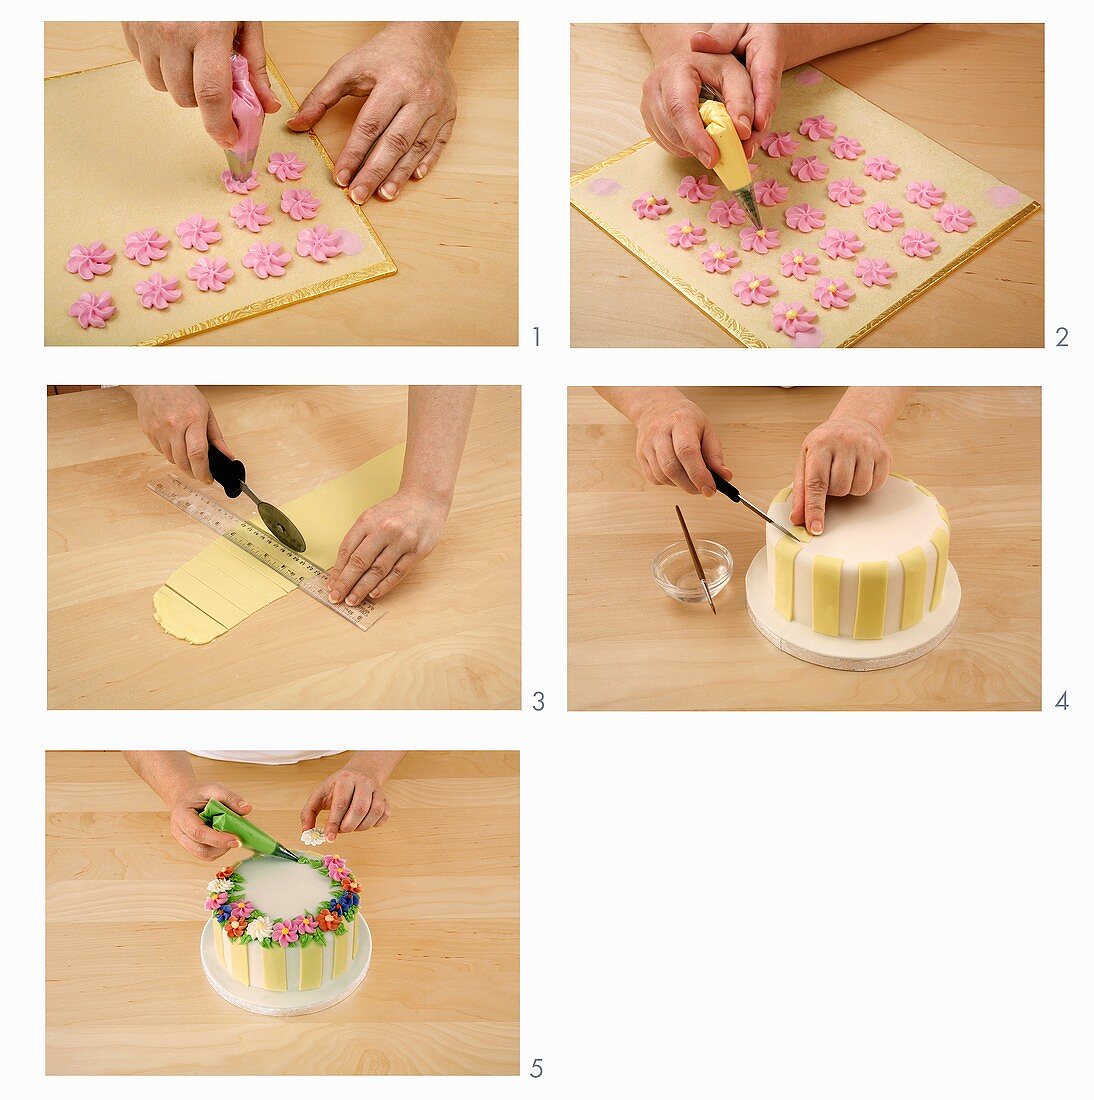 Making sugar flowers and decorating a cake